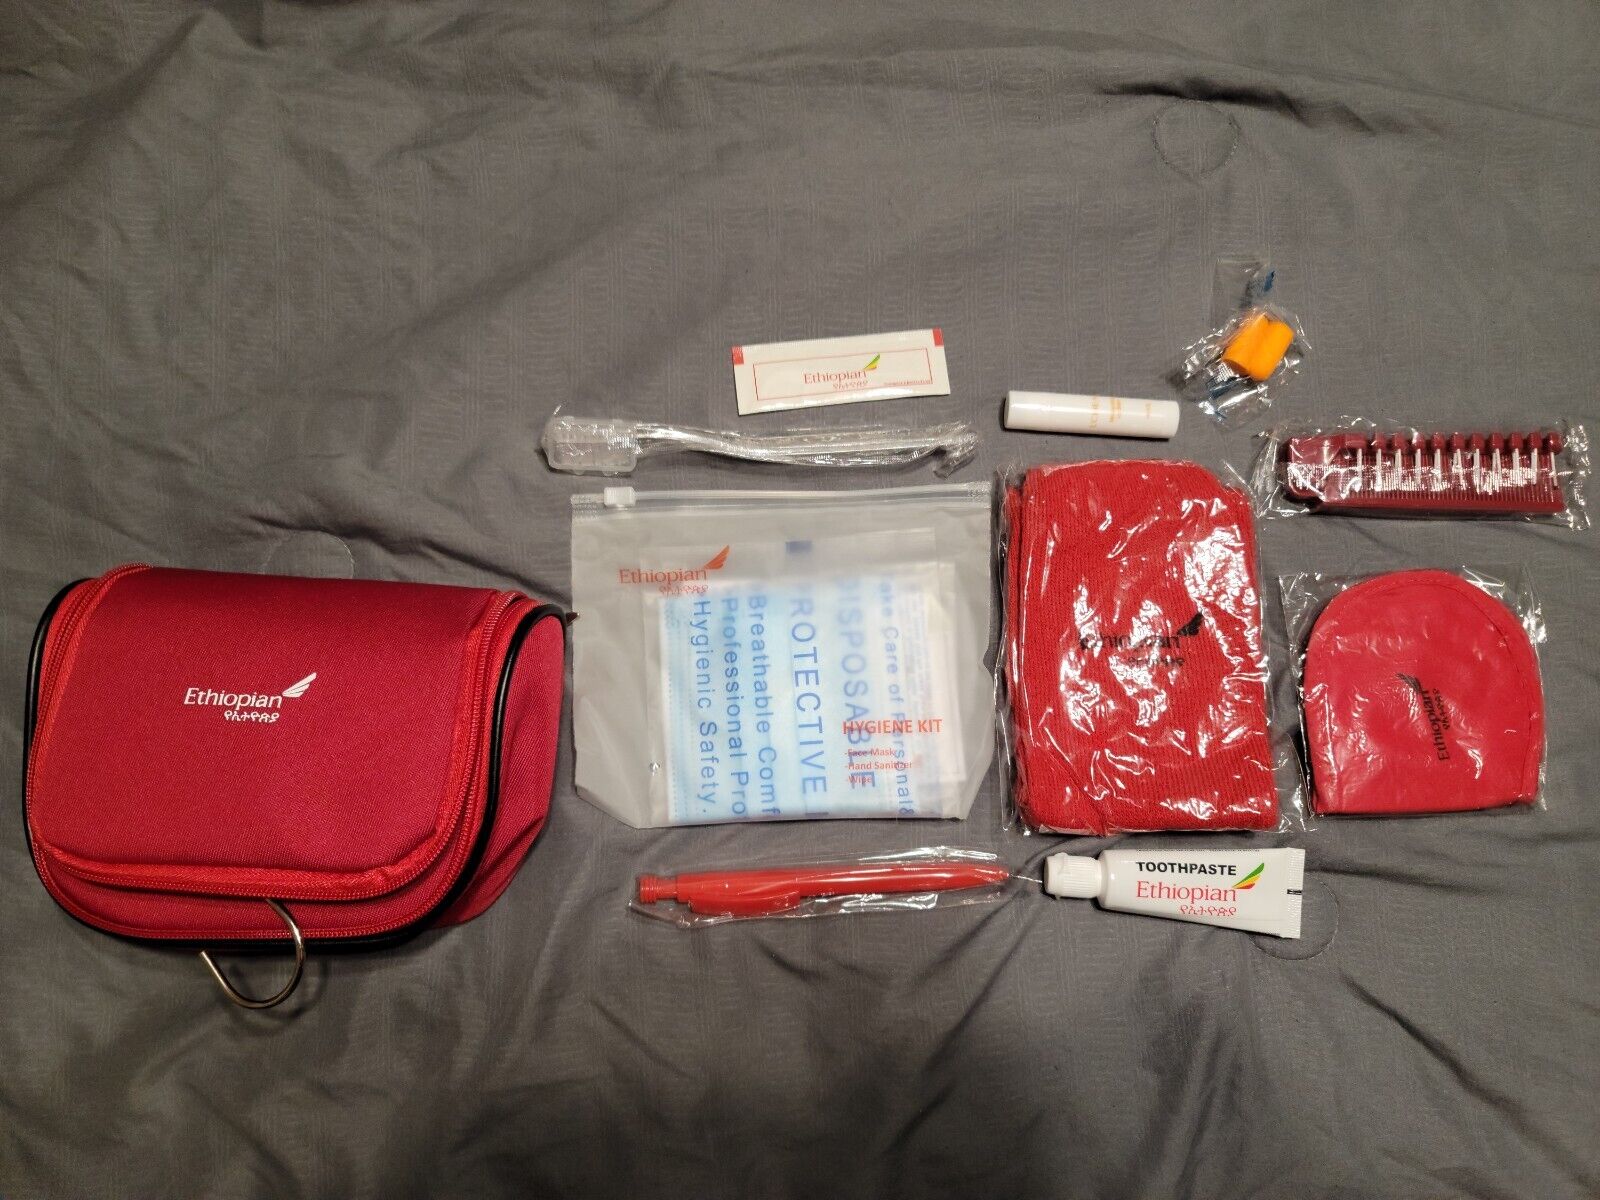 Ethiopian Airlines Travel Bag Kit for Collectors